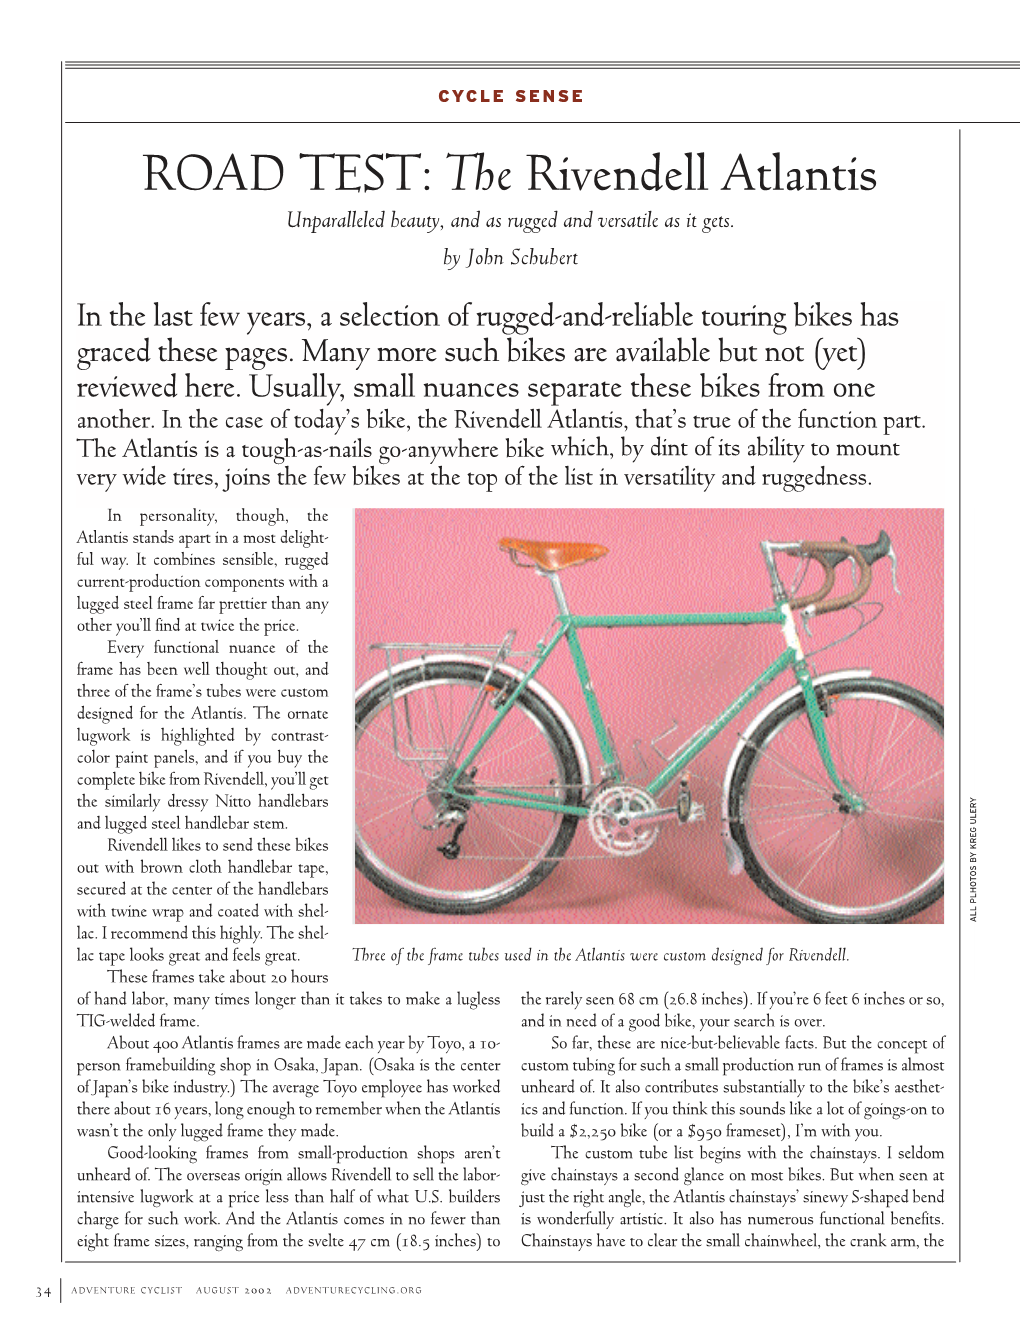 ROAD TEST: the Rivendell Atlantis Unparalleled Beauty, and As Rugged and Versatile As It Gets